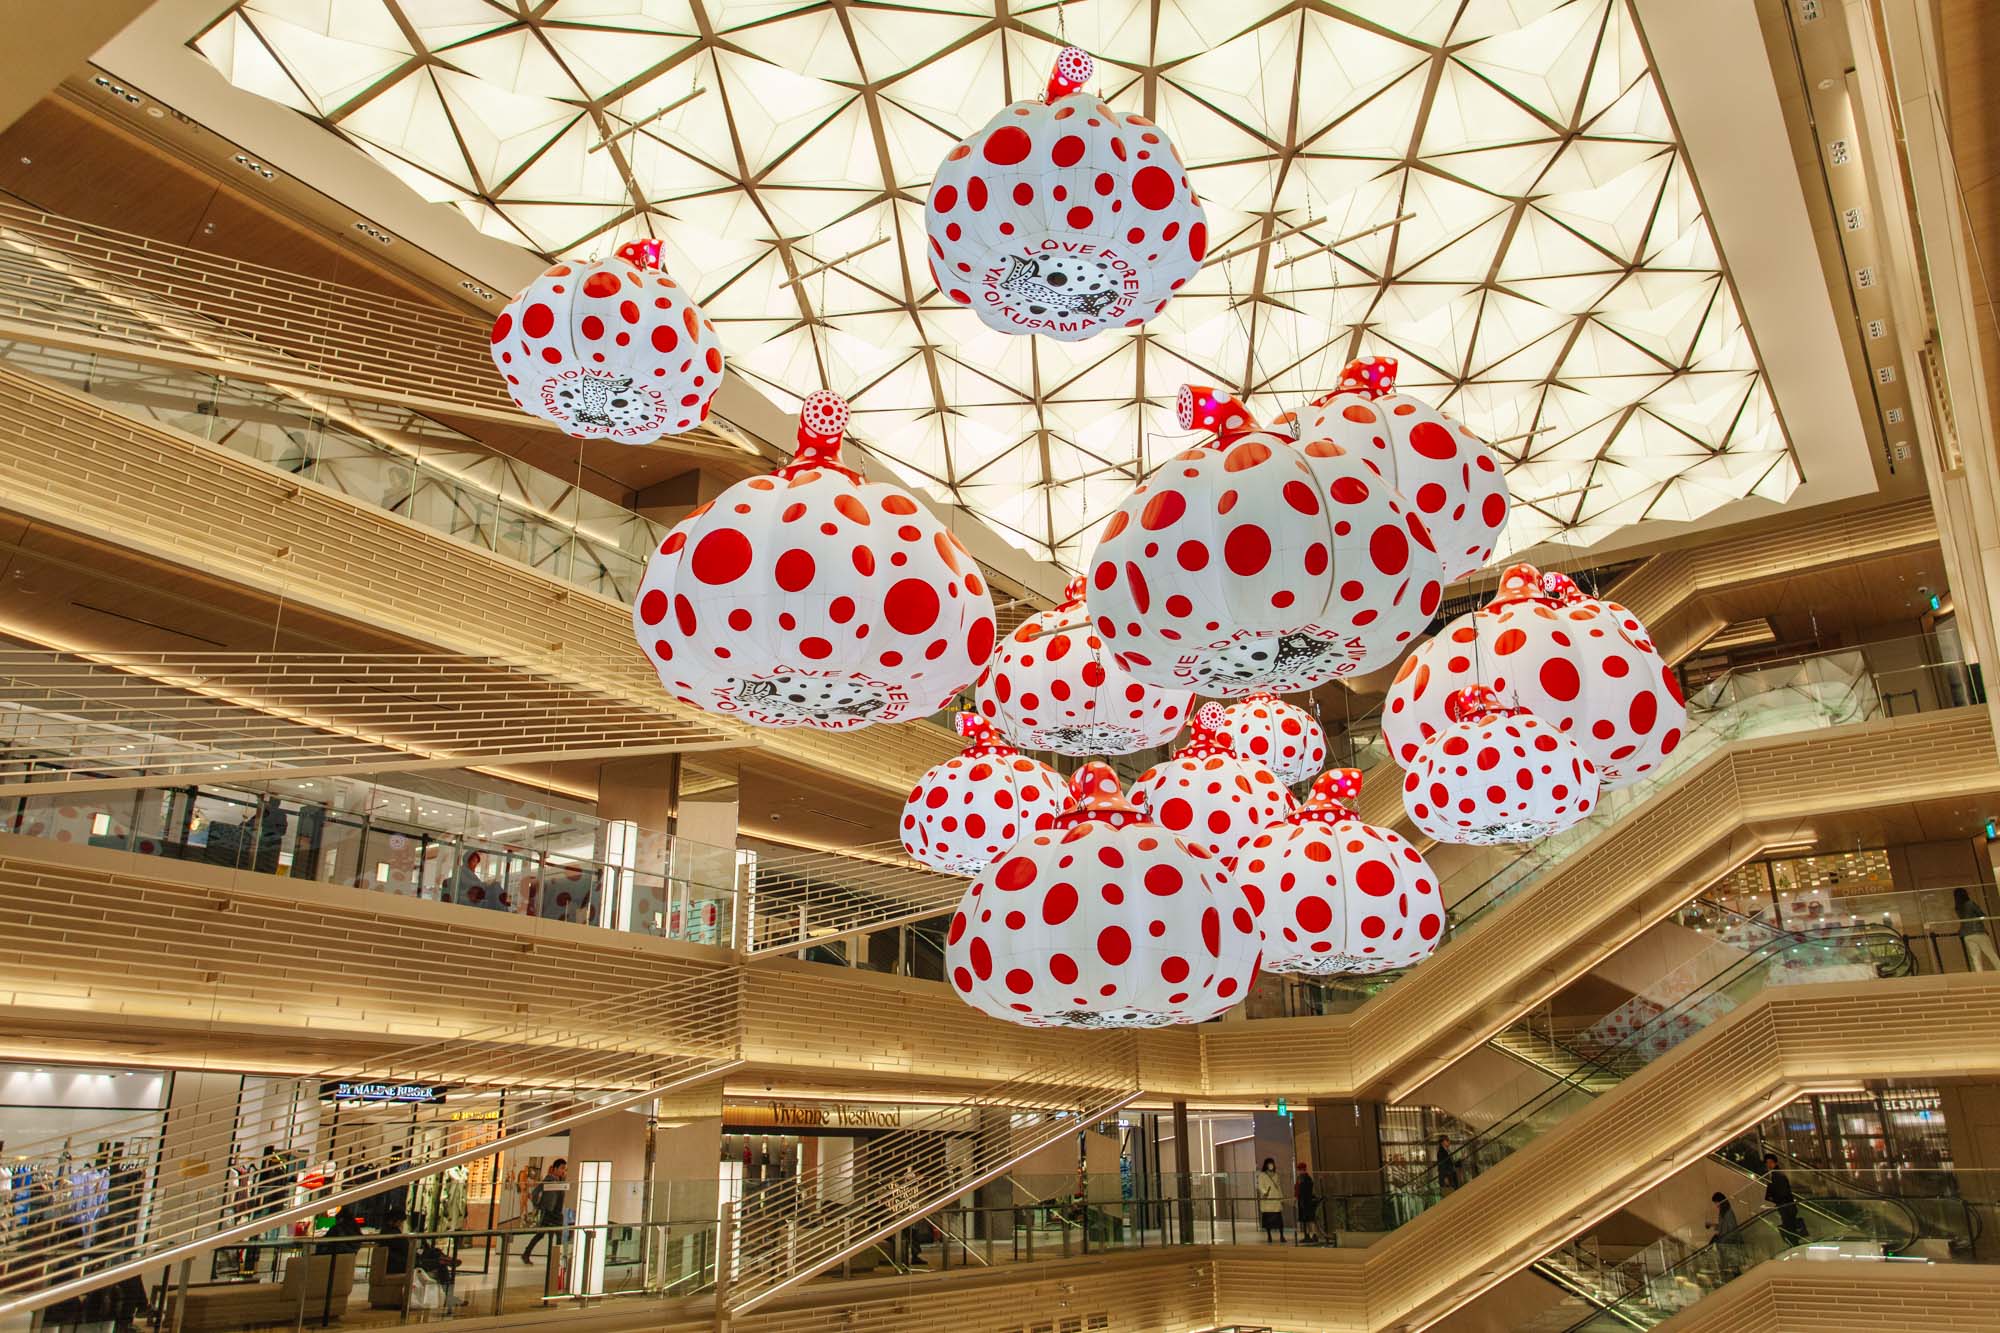 Take a Look Inside Louis Vuitton's Stunning New Tokyo Store